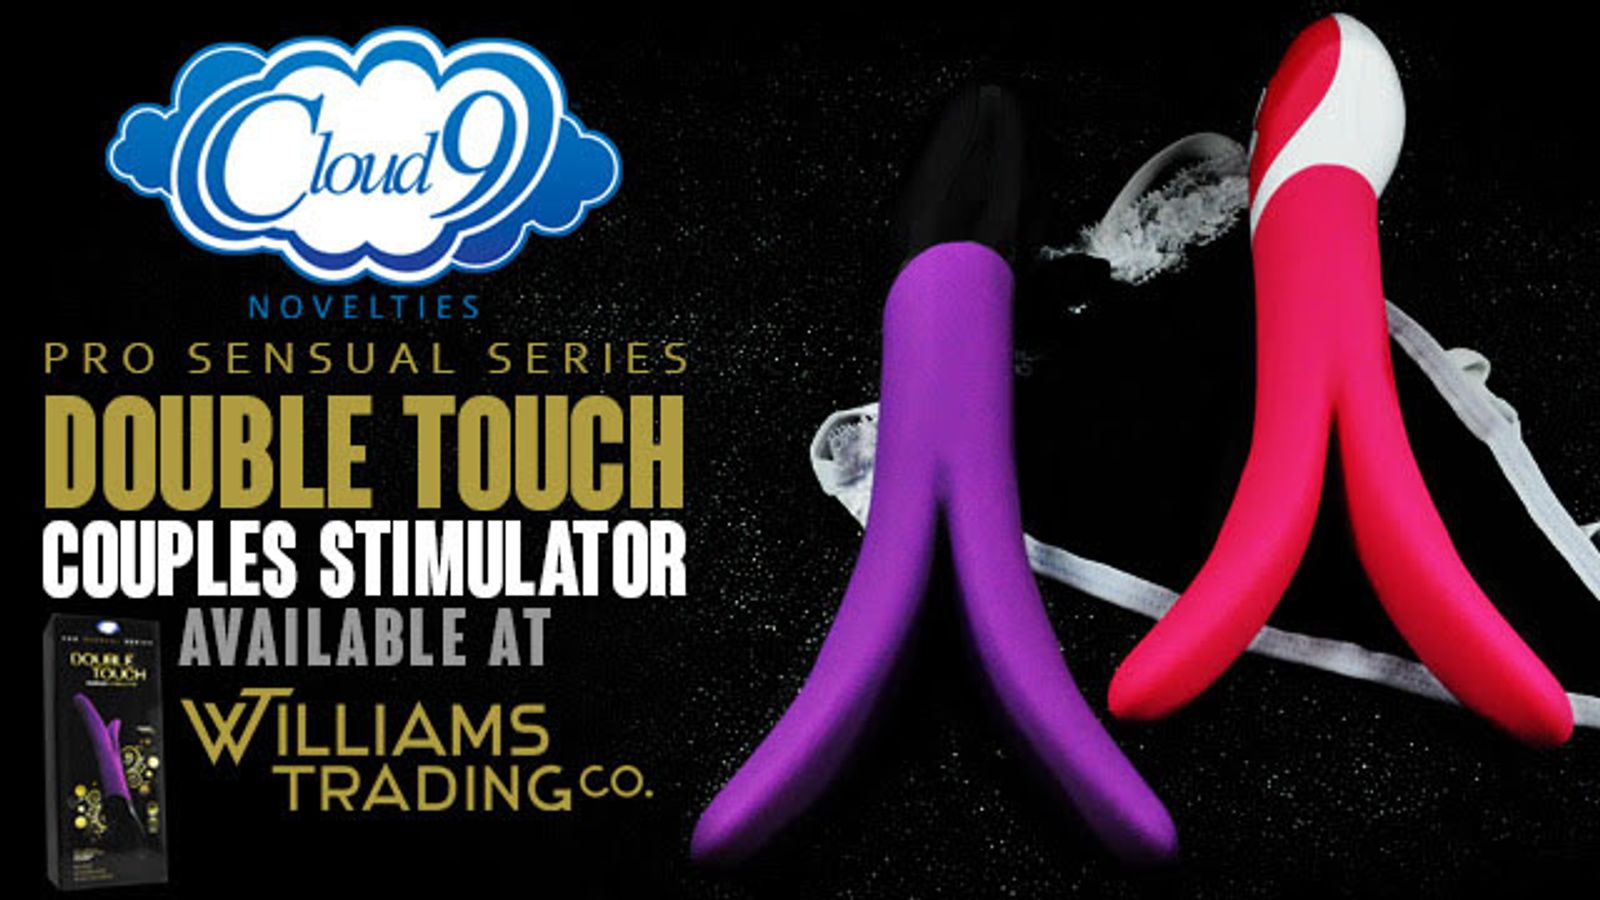 Williams Trading Has Cloud 9 Double Touch Couples Stimulator Available